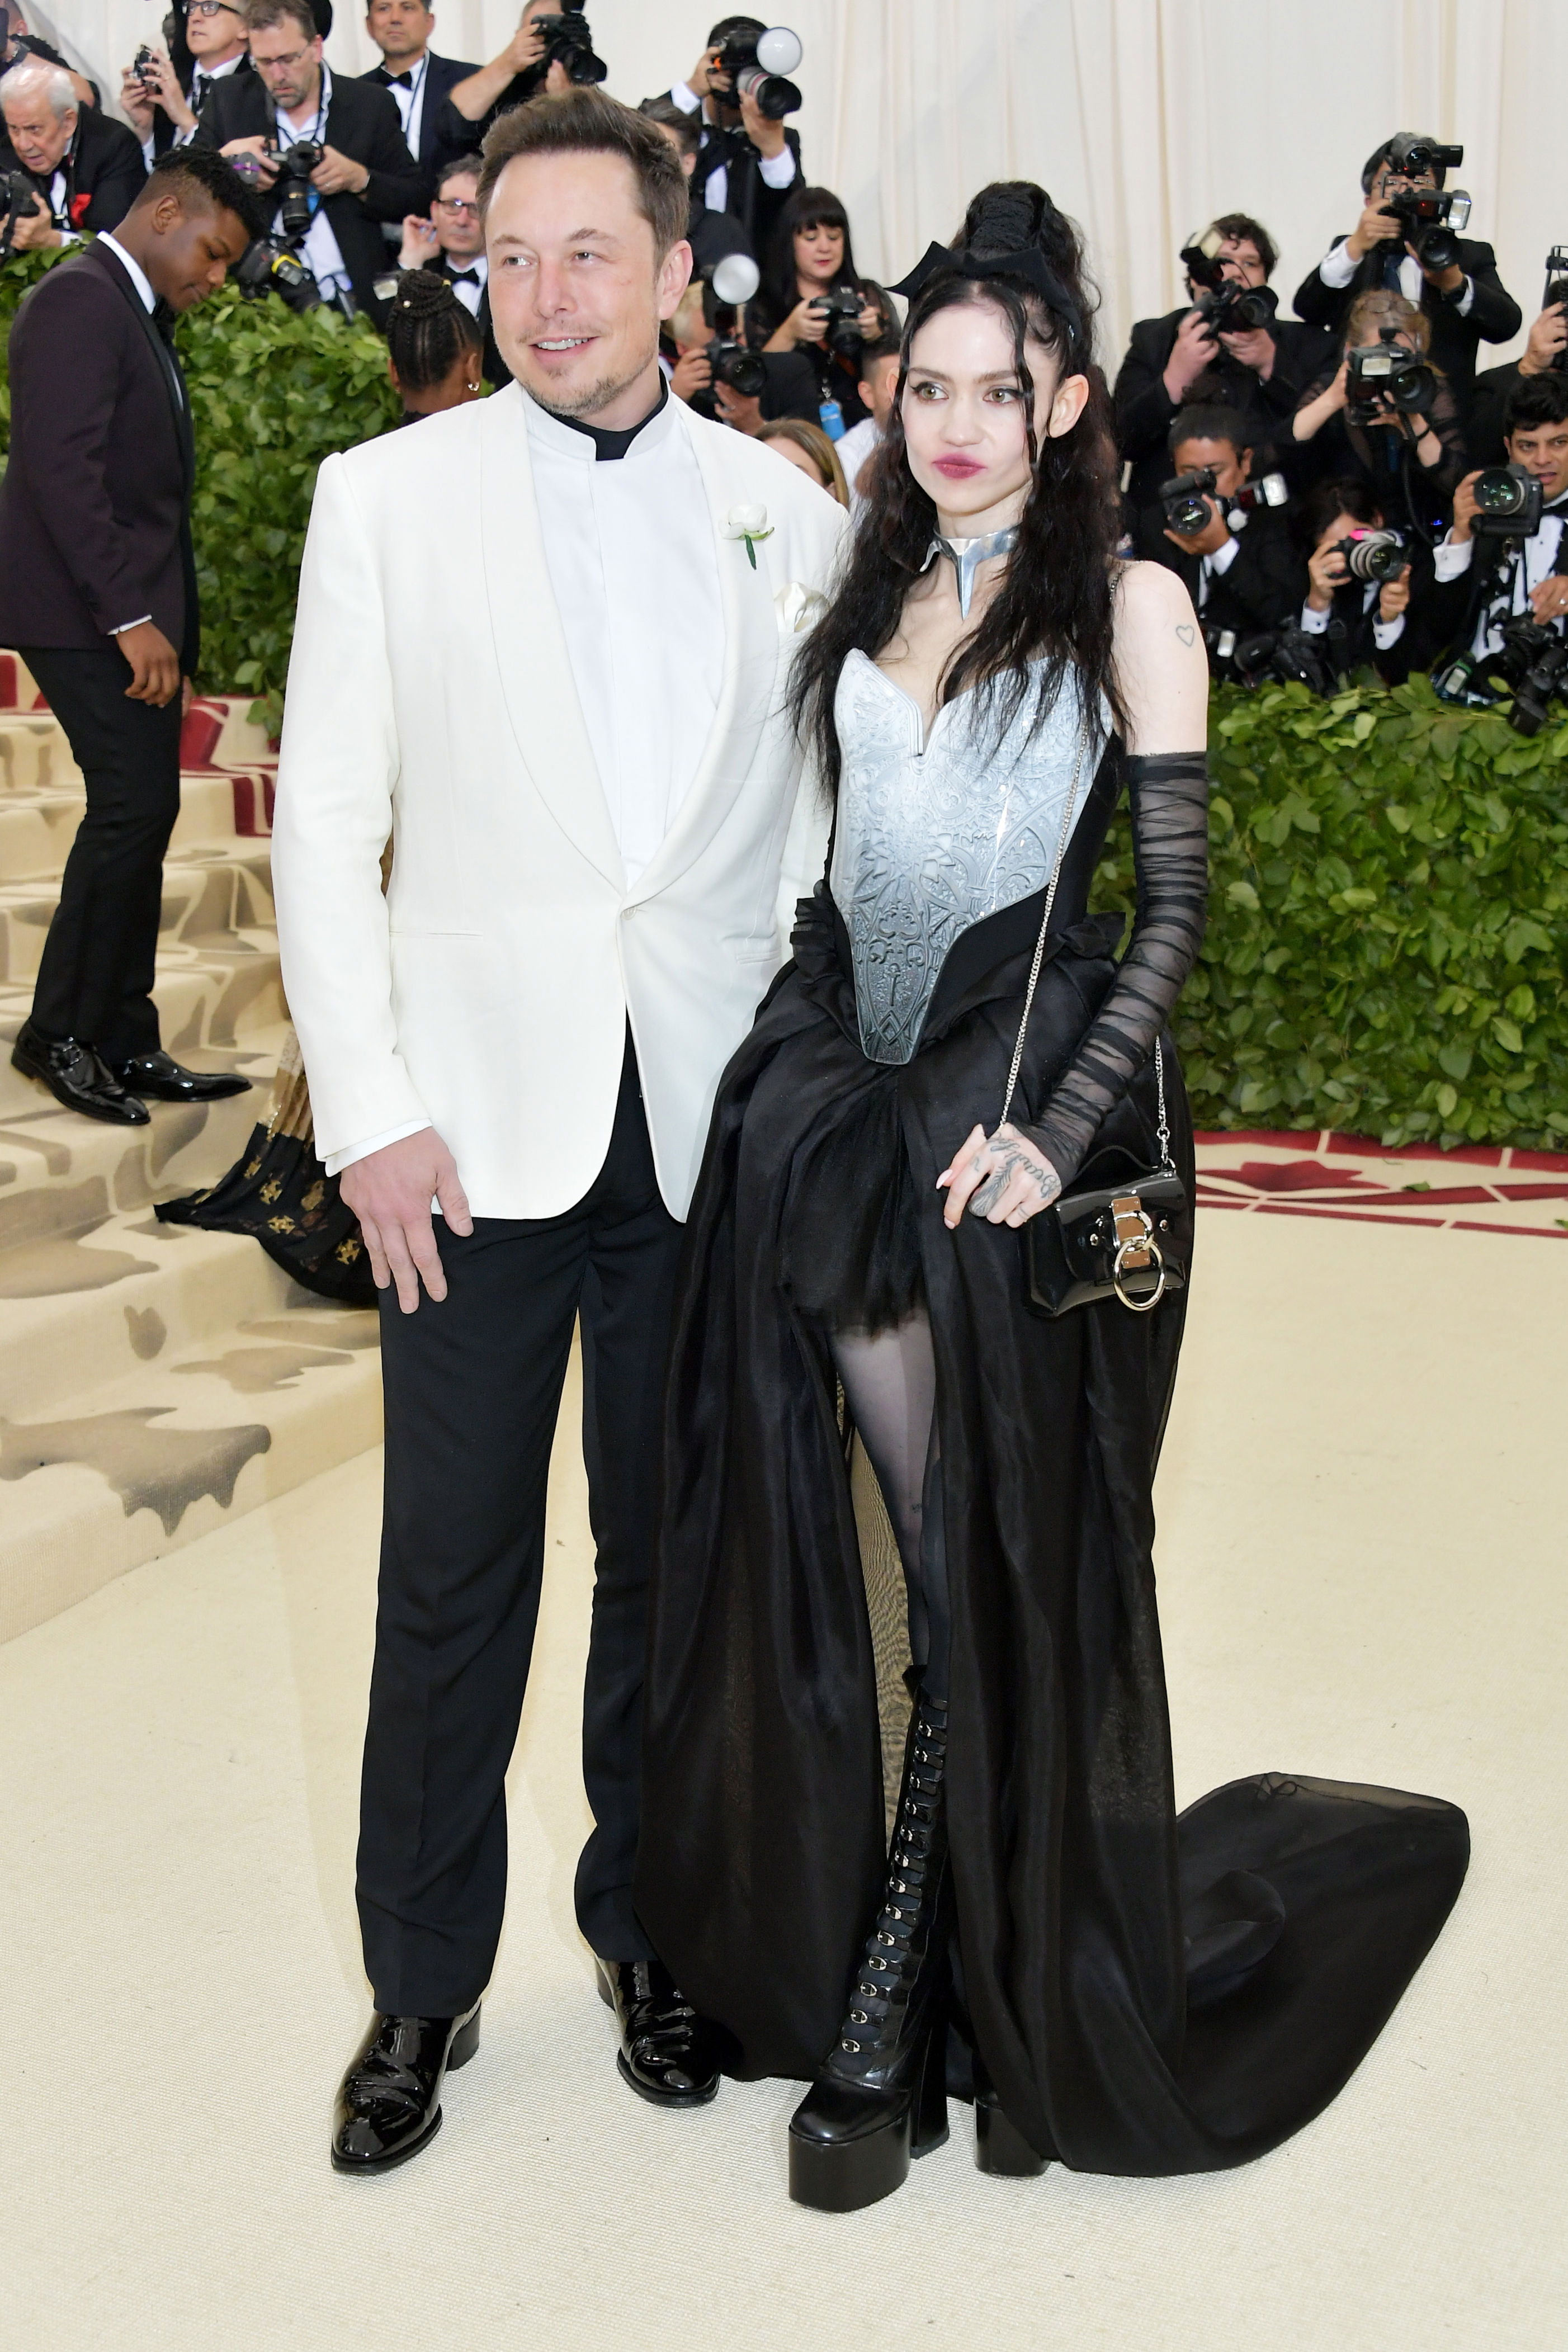 <p>Billionaire businessman Elon Musk and Canadian singer Grimes made their first public appearance as a couple at the <a href="https://www.wonderwall.com/style/fashion/2018-met-gala-see-all-stars-fashions-big-event-3014142.gallery">2018 Met Gala</a>. In 2020, the "Oblivion" singer welcomed her first child with the Tesla and SpaceX founder, who's 16 years her senior. The off-and-on couple welcomed a second child via surrogate in late 2021.</p>